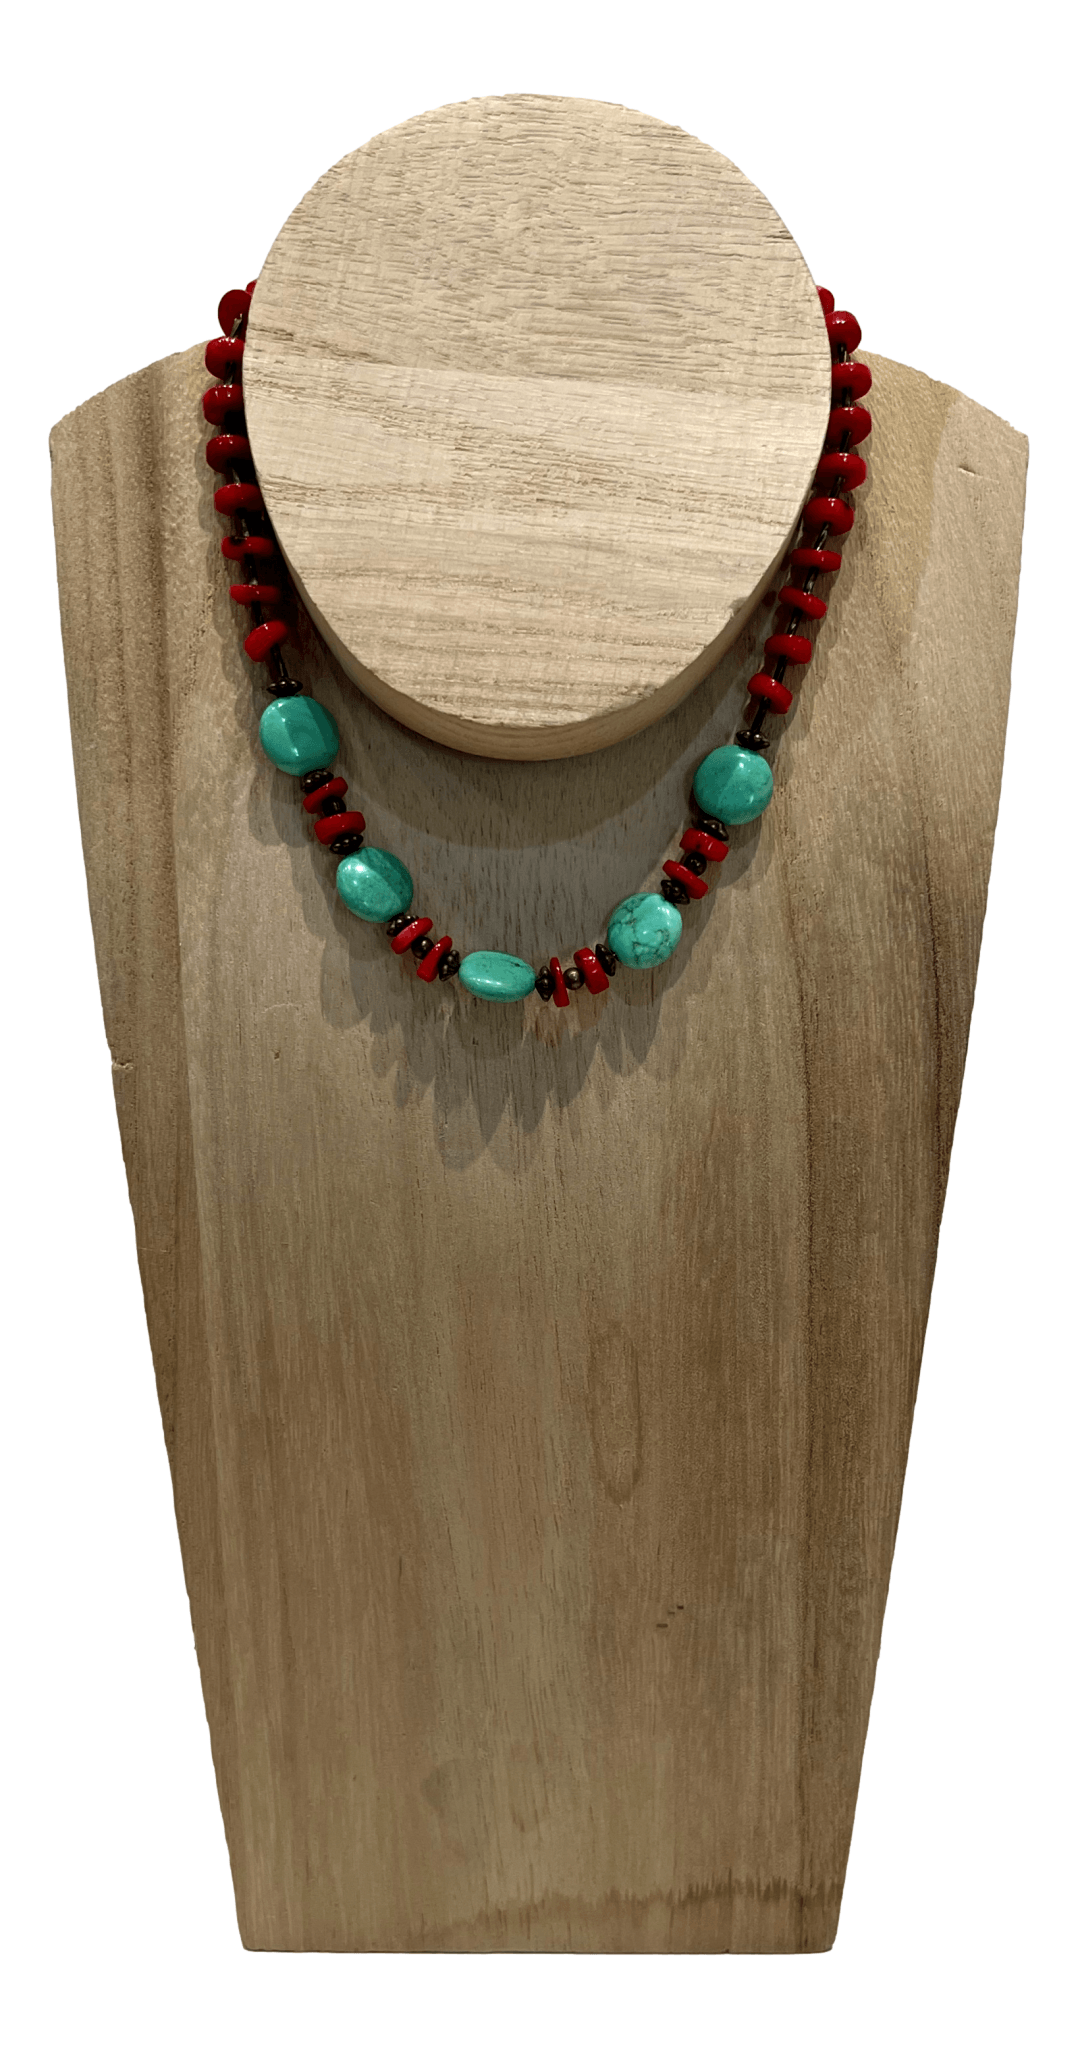 Necklace Sterling Silver Coral Turquoise Bead Choker Length 6.5 inches - Ysleta Mission Gift Shop- VOTED El Paso's Best Gift Shop